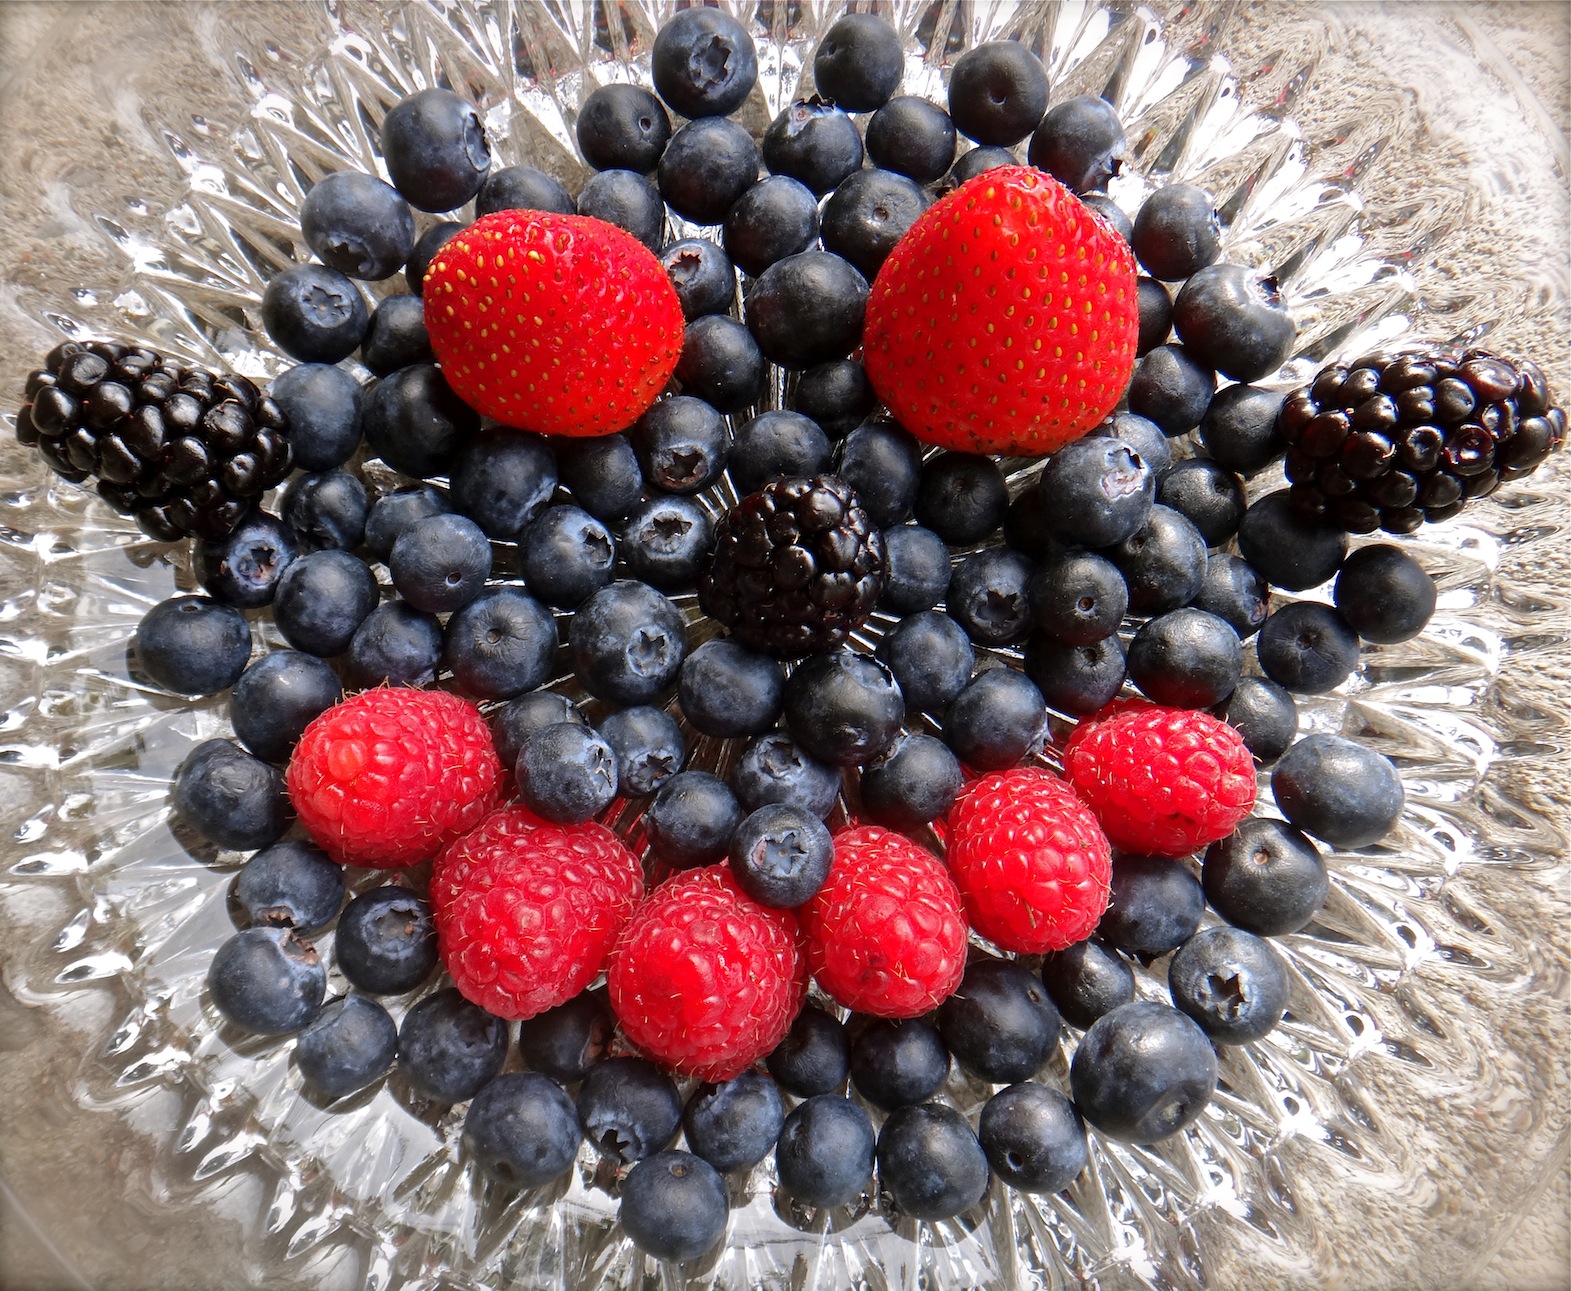 Antioxidants: What the heck are they & why should we care?